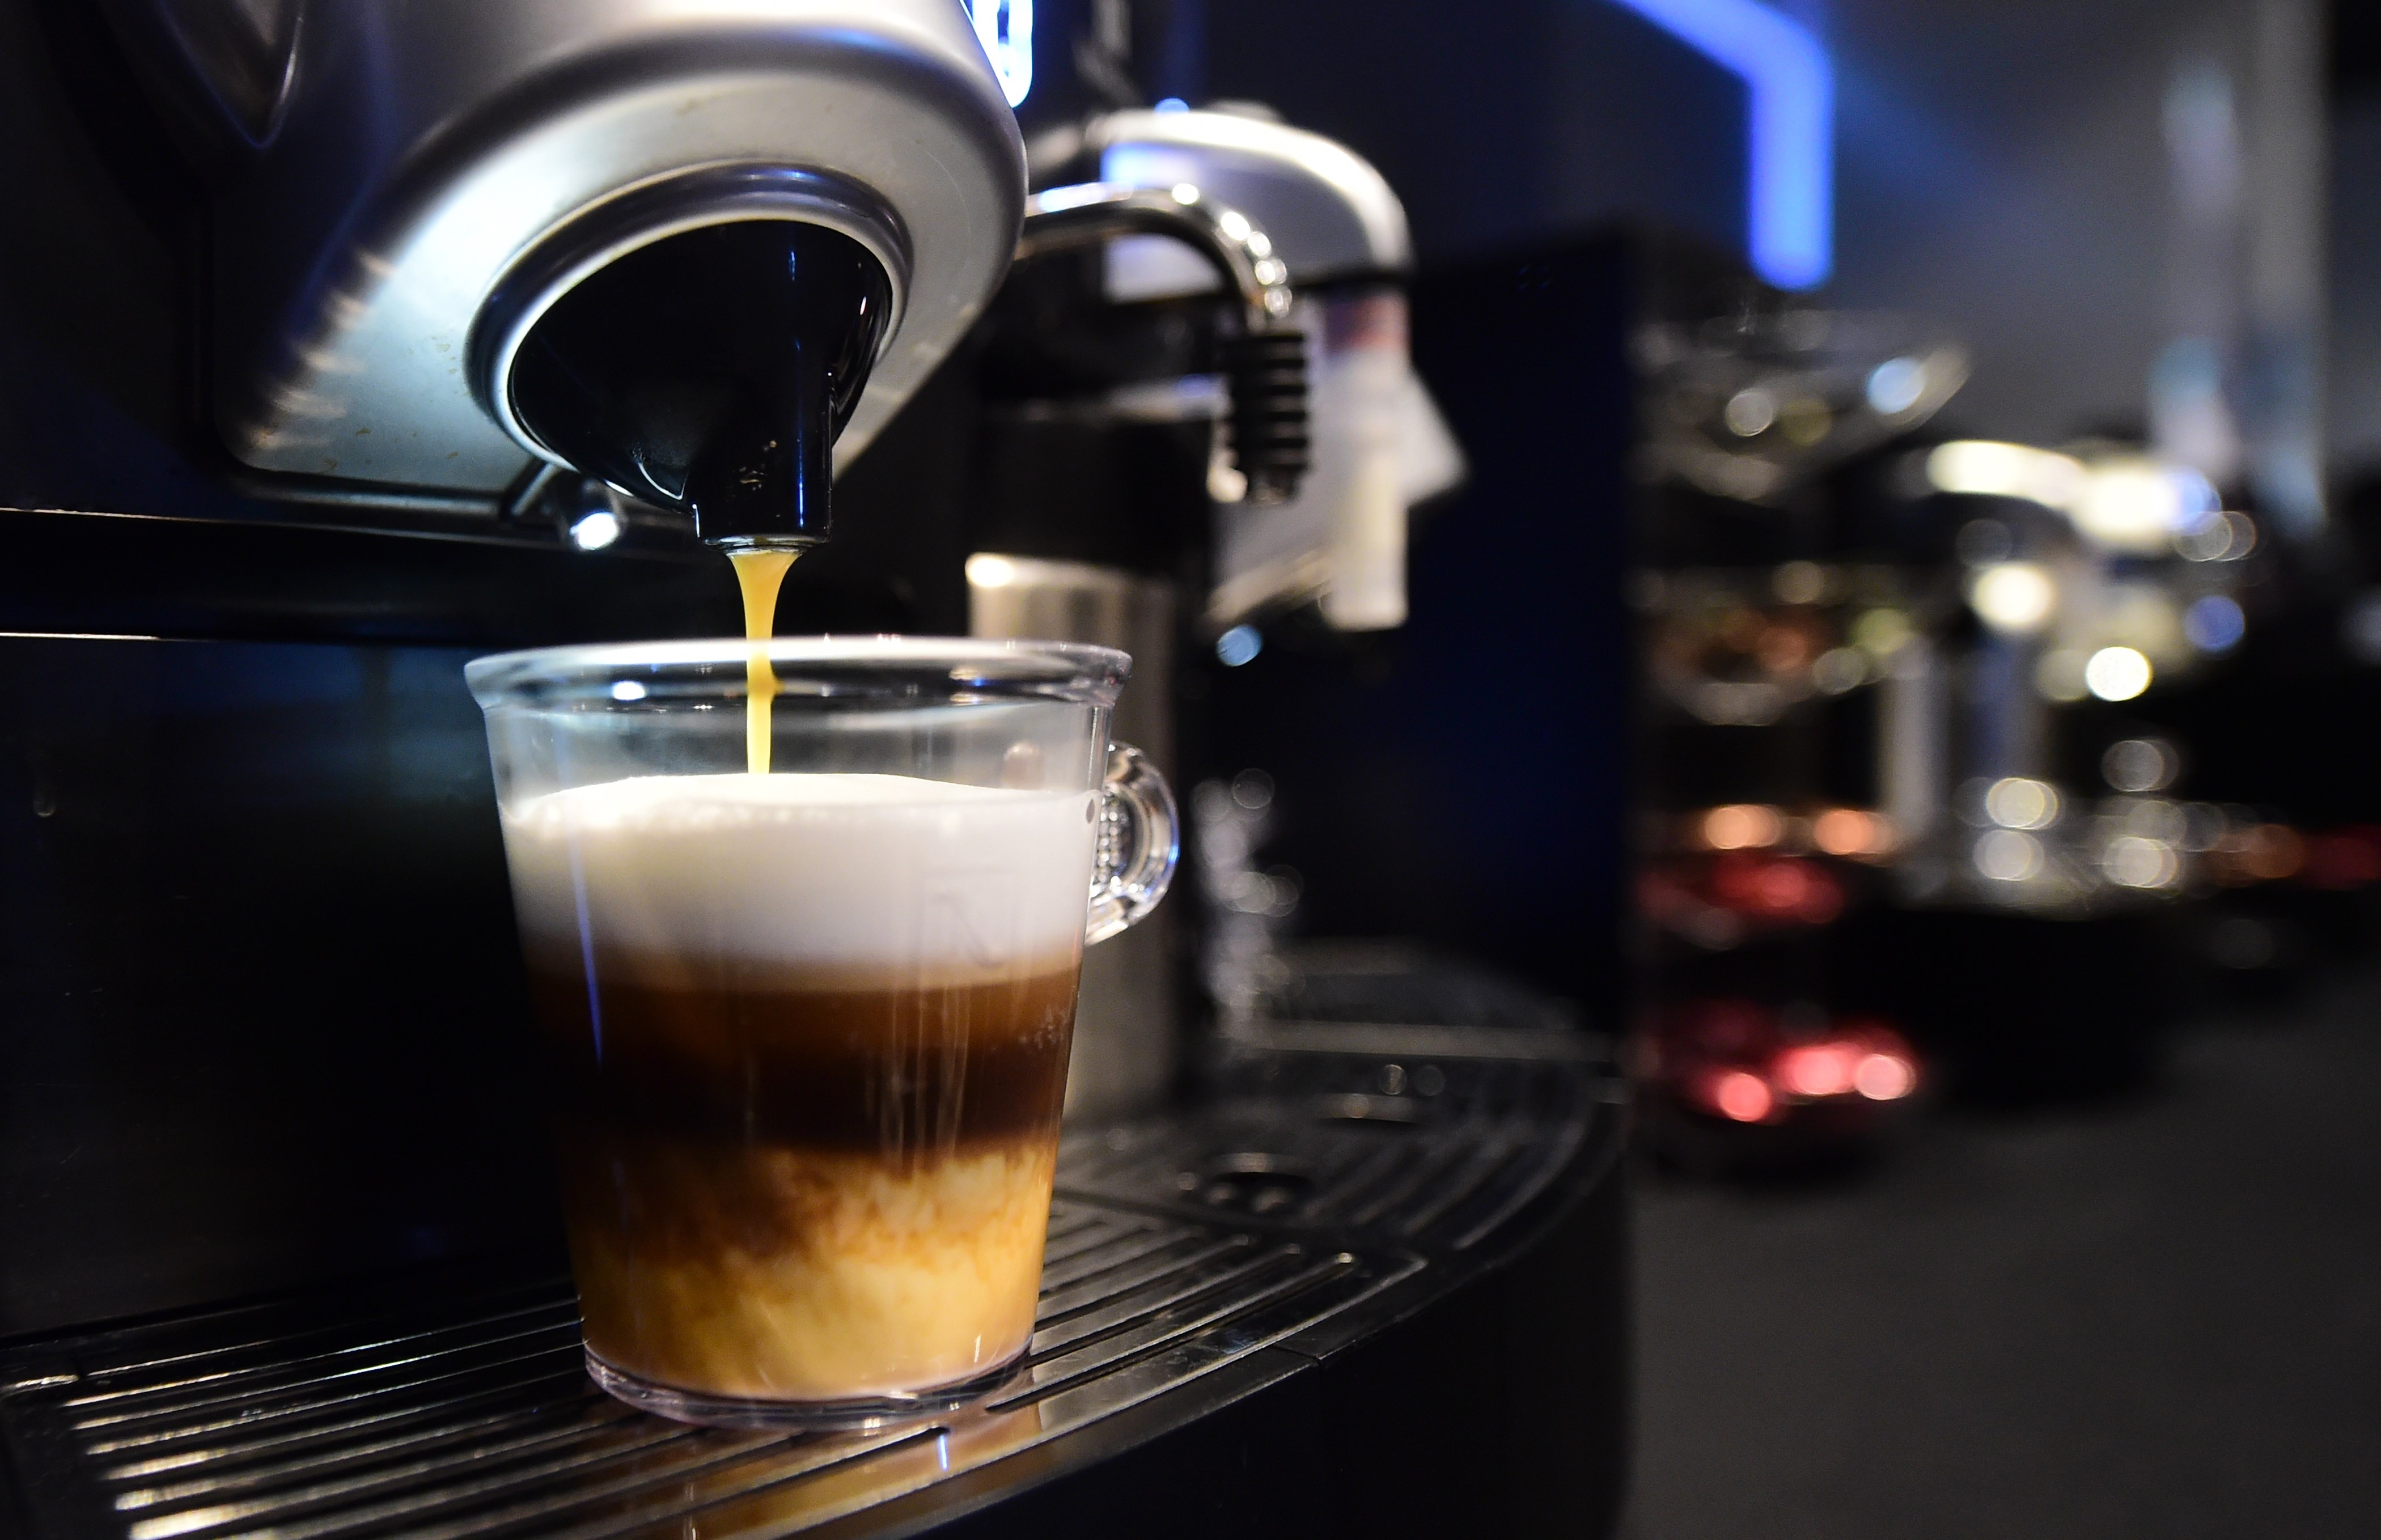 A triple-layered espresso from Nespresso's Gemini CS200 pro coffee machine is prepared at The Luxury Technology Show, produced by RAND Luxury in Hollywood, California on September 30, 2015 (Frederic J. Brown—AFP/Getty Images)